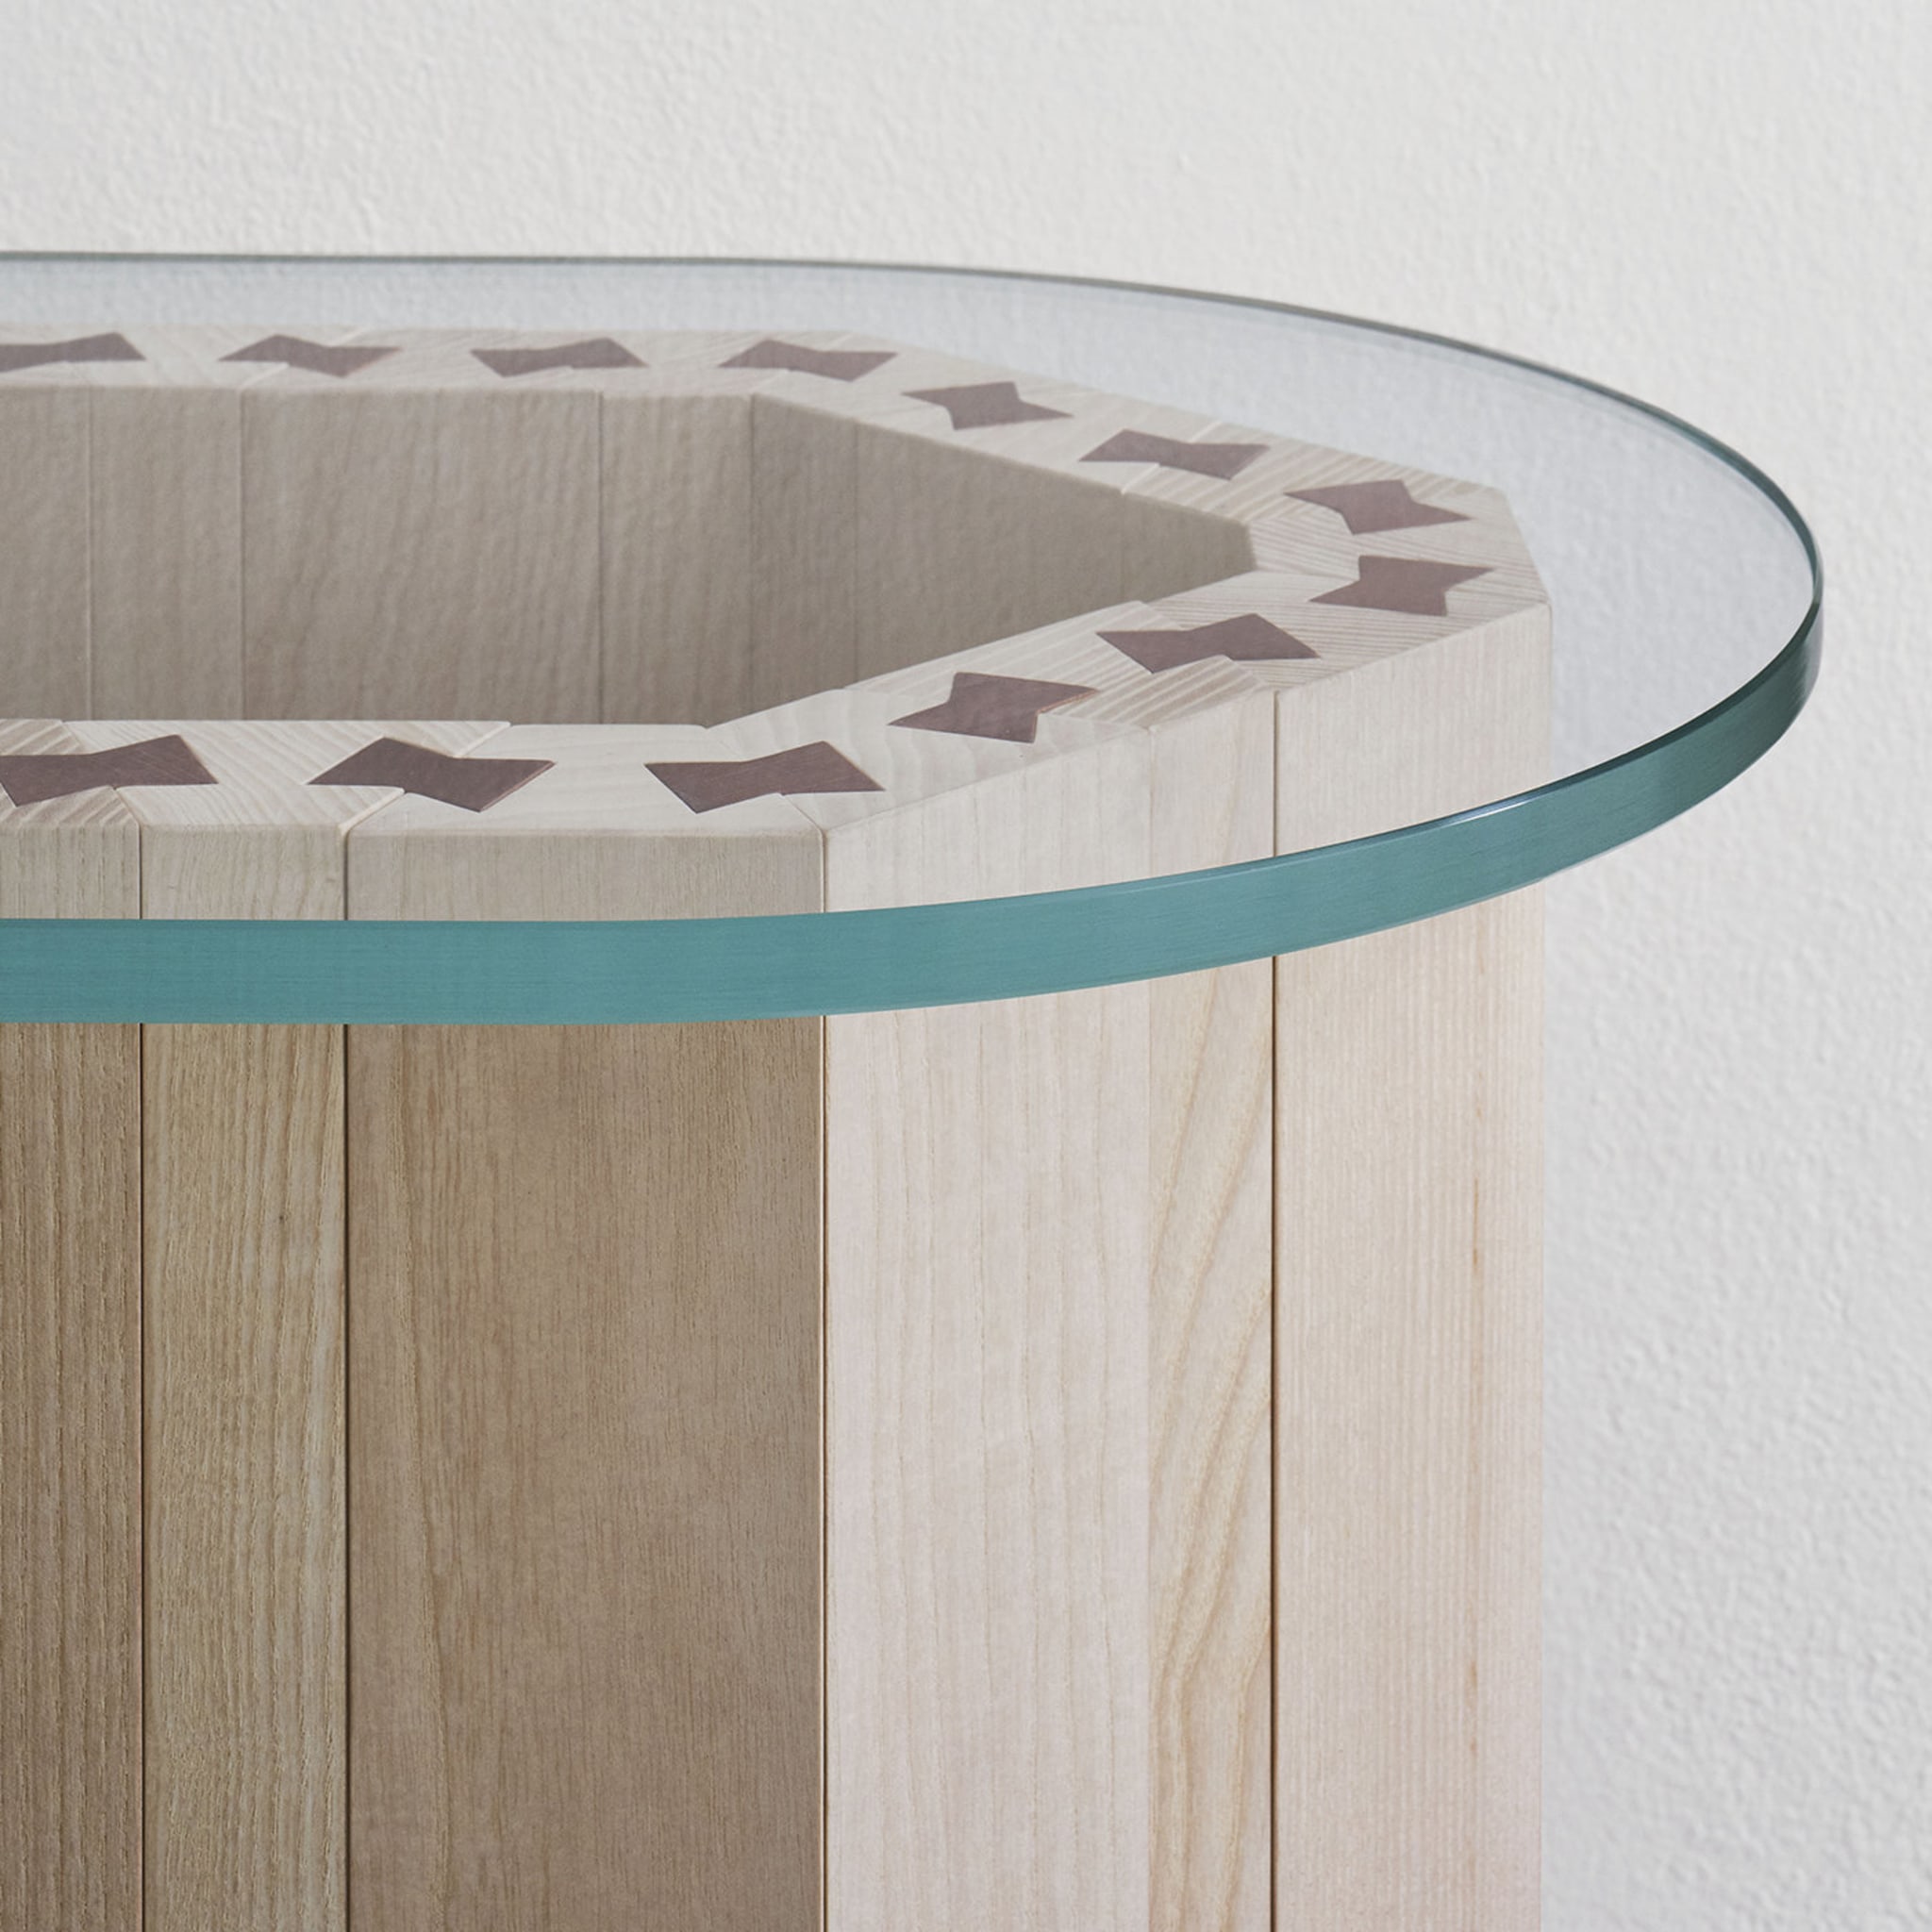 Swallow Coffee Table by Francesco Citterio - Alternative view 1